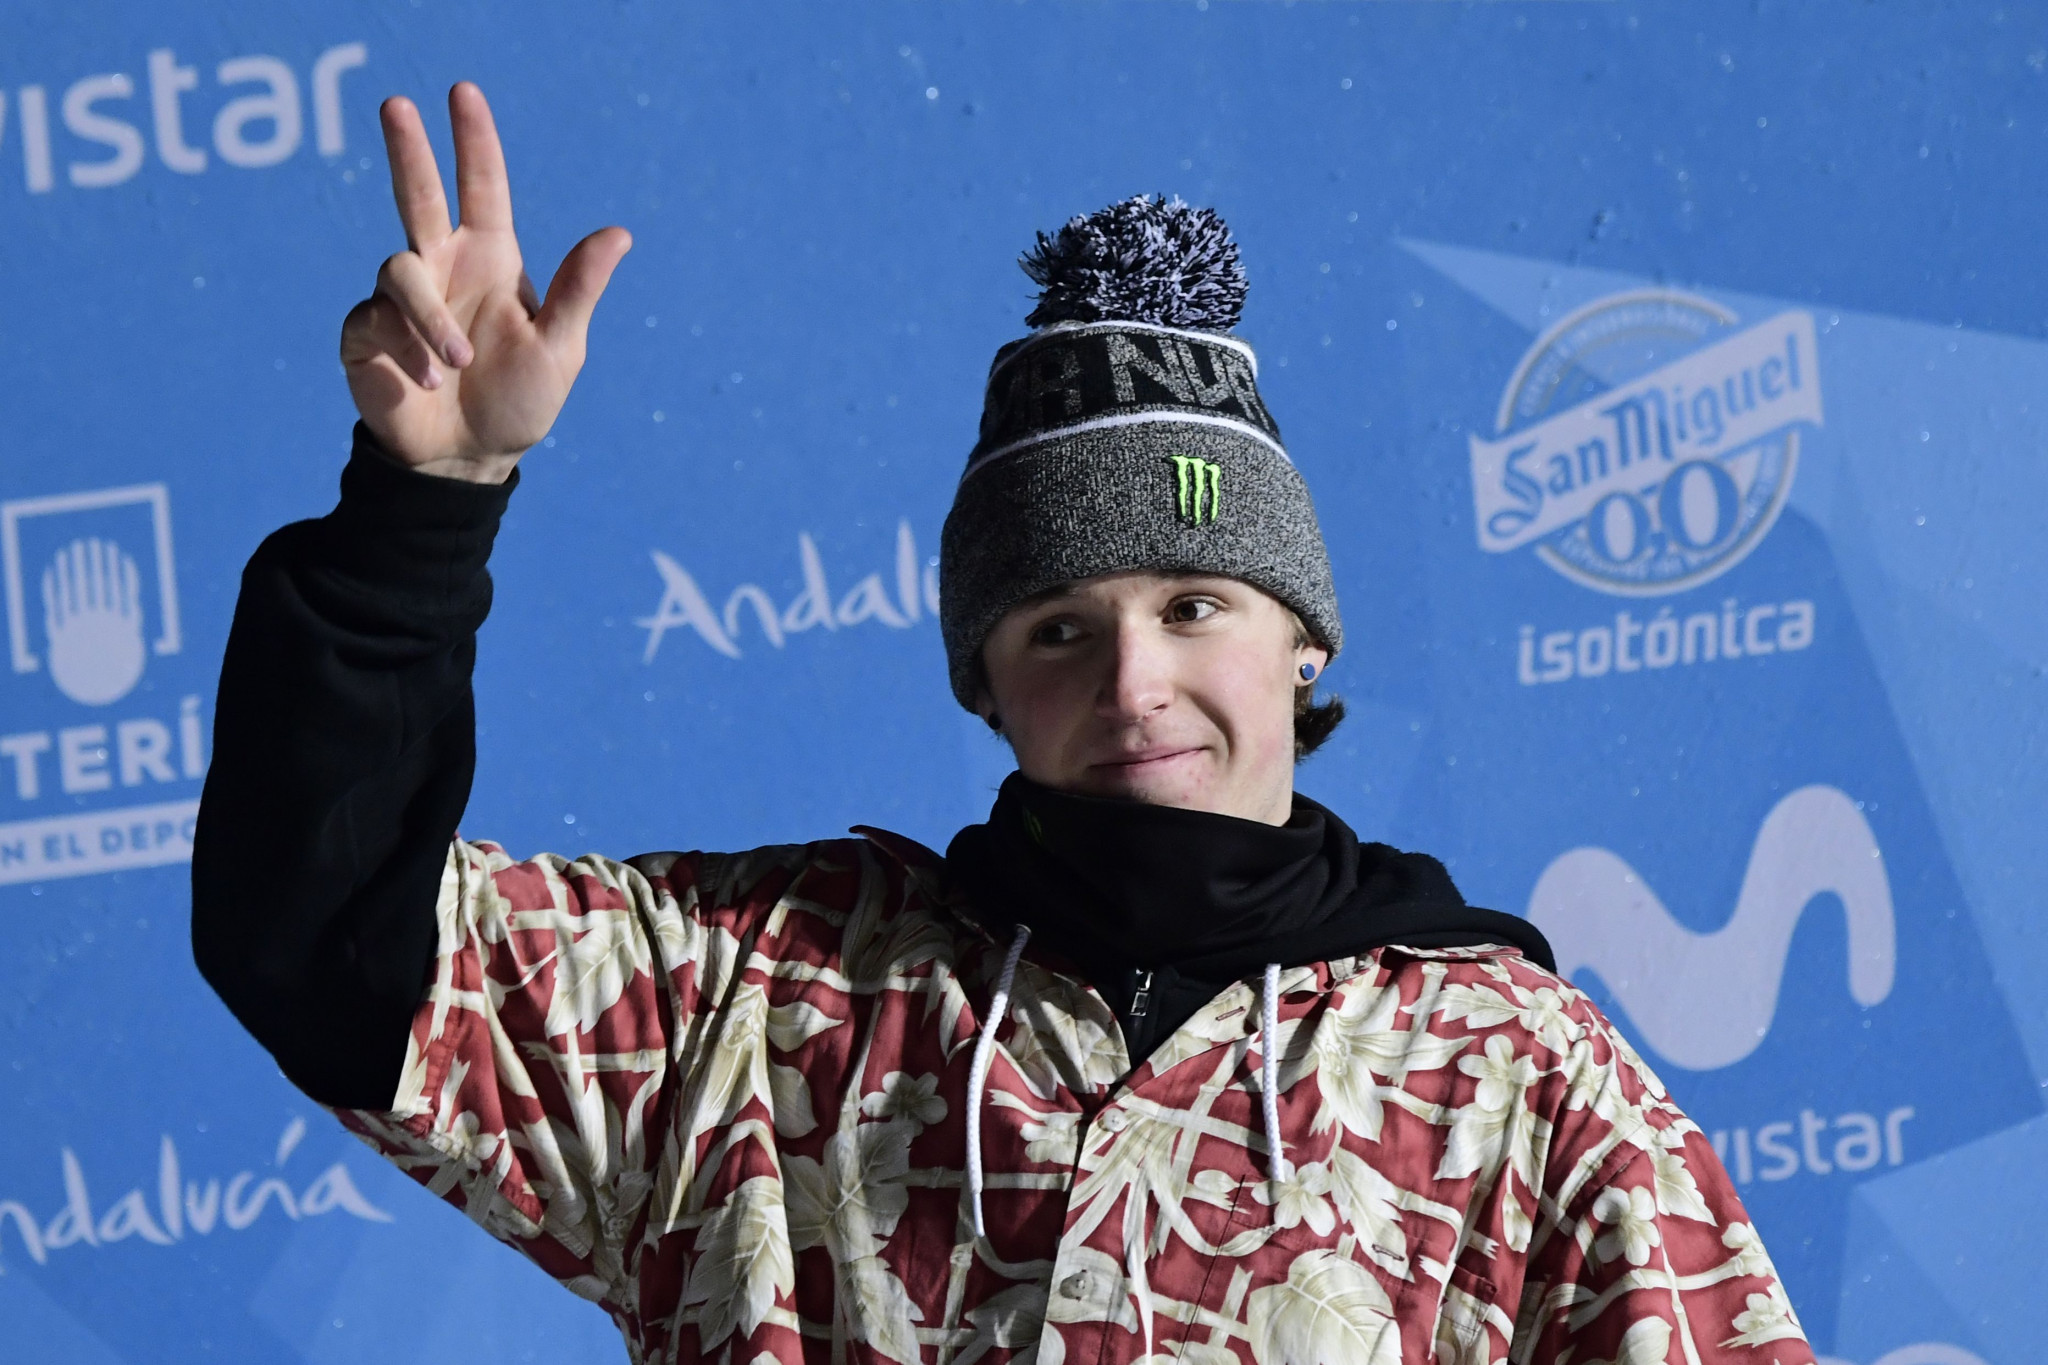 Corning heads American clean sweep at FIS Snowboard Big Air World Cup